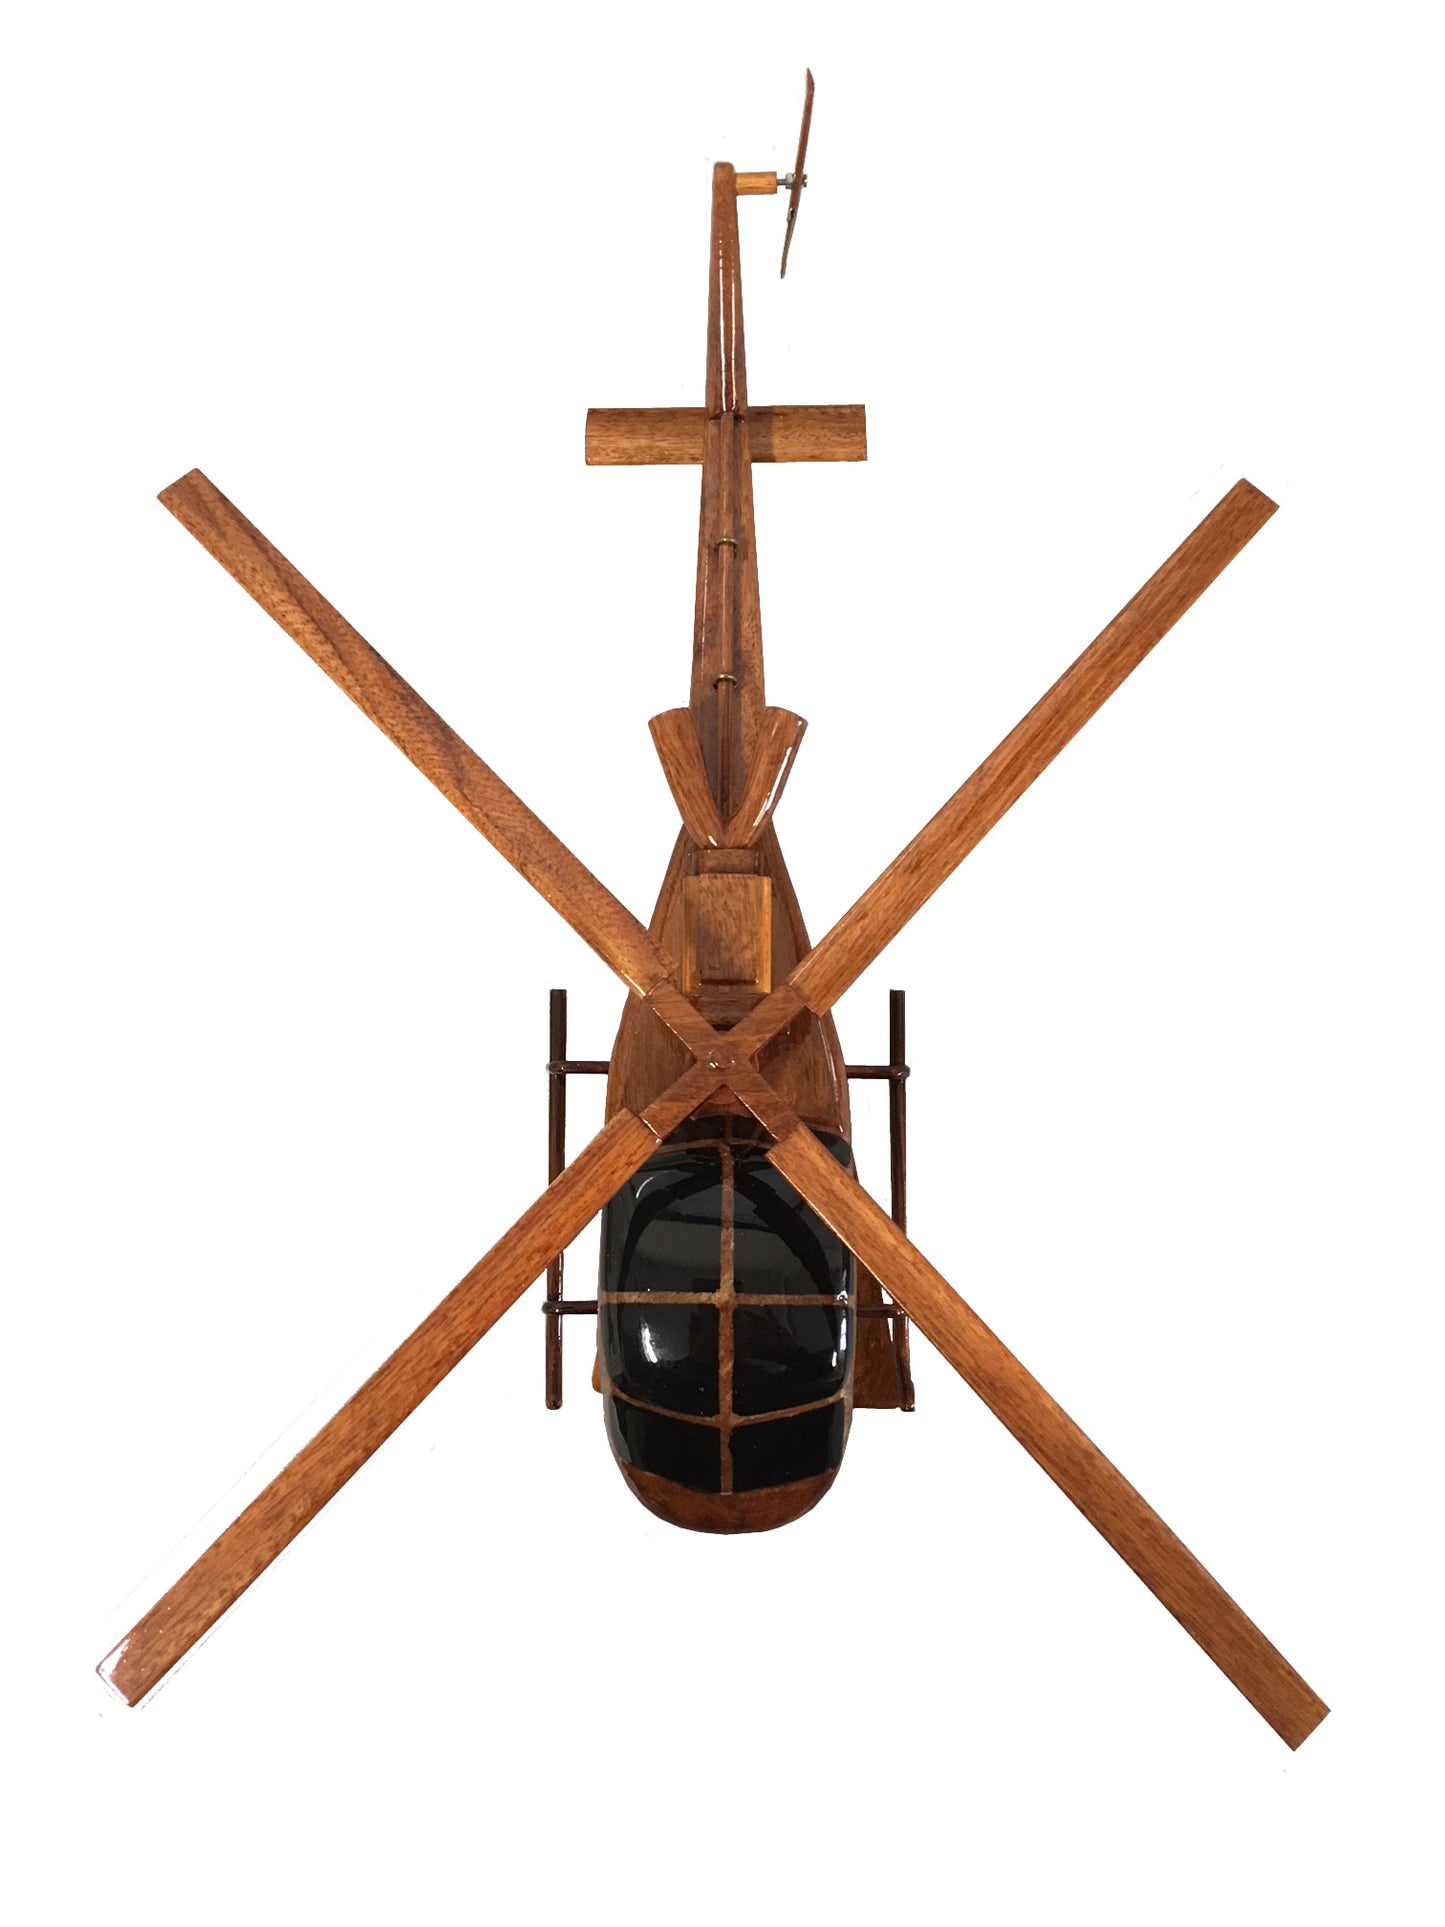 Westland Scout British Army Royal Australian Navy South African Air Force Light General Use Military Helicopter Wooden Desktop Model